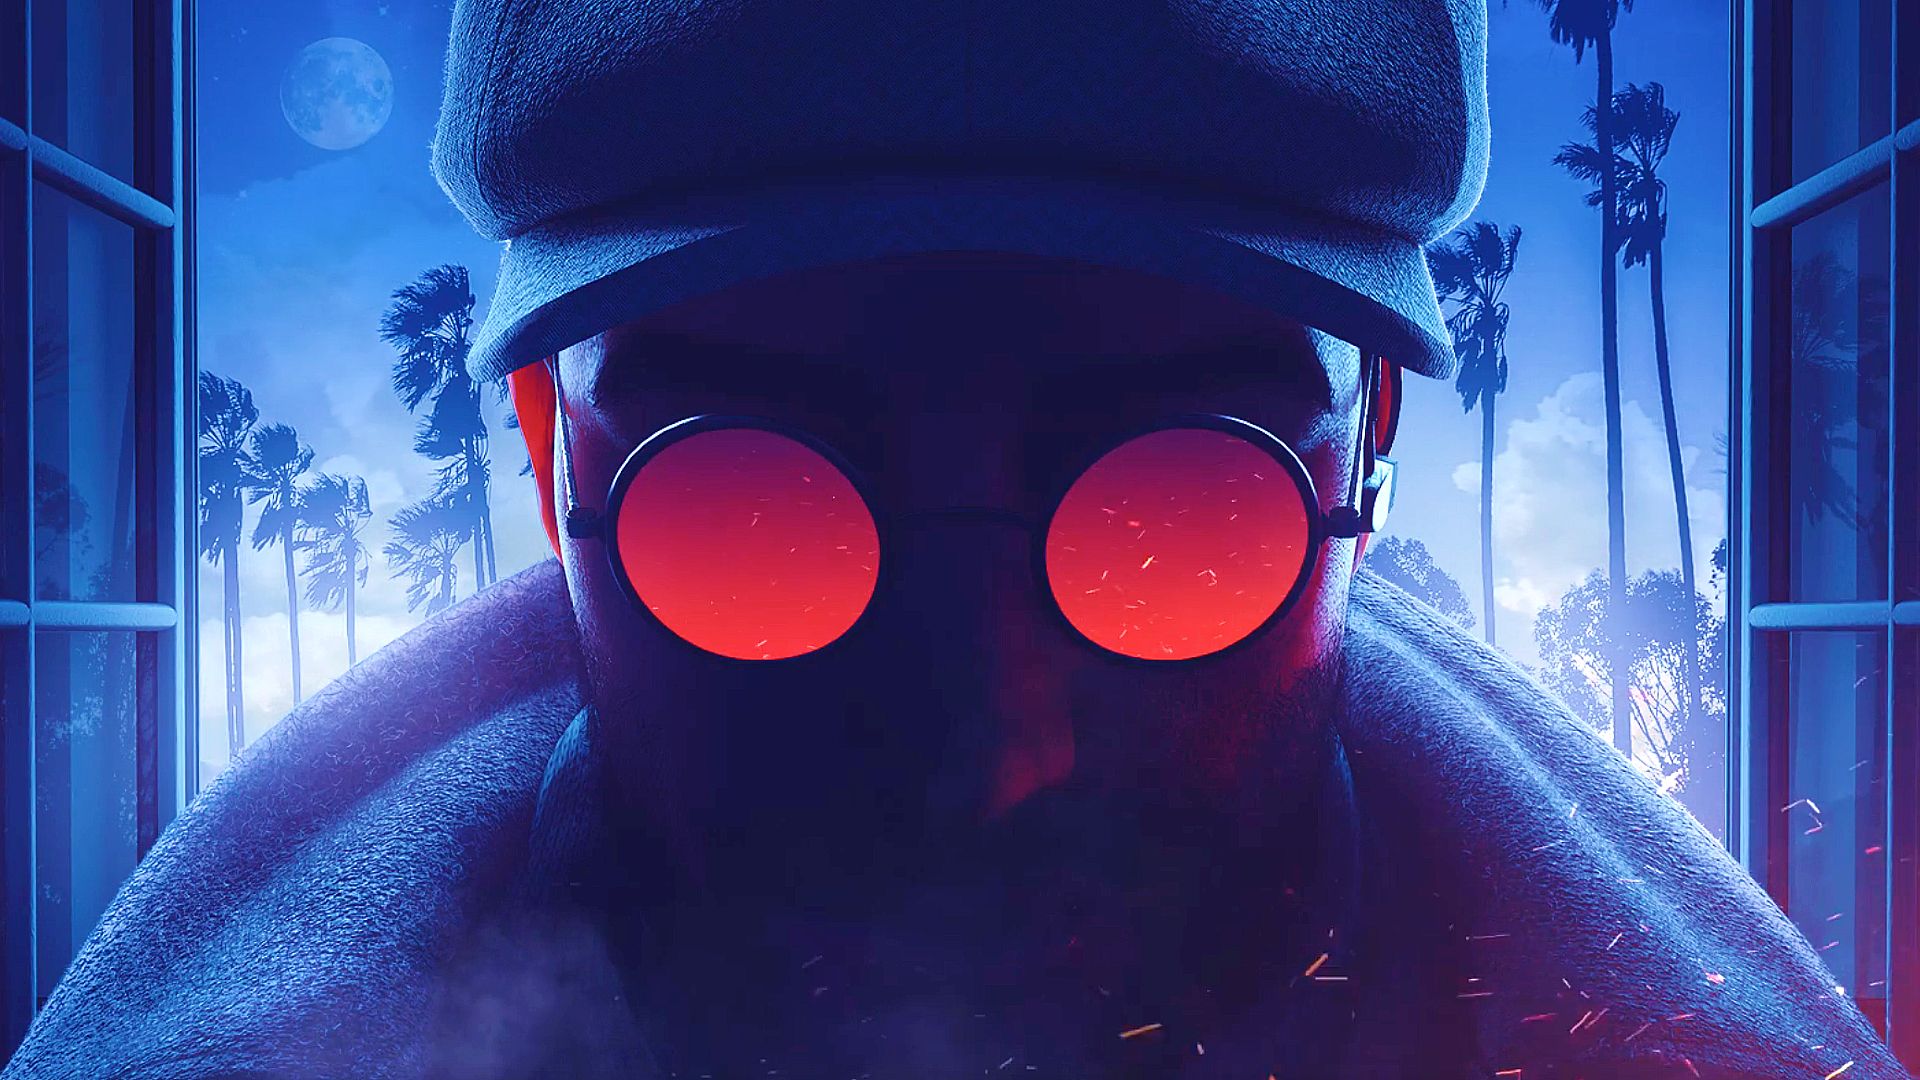 Rainbow Six Siege has issued 166k bans in the past 18 months